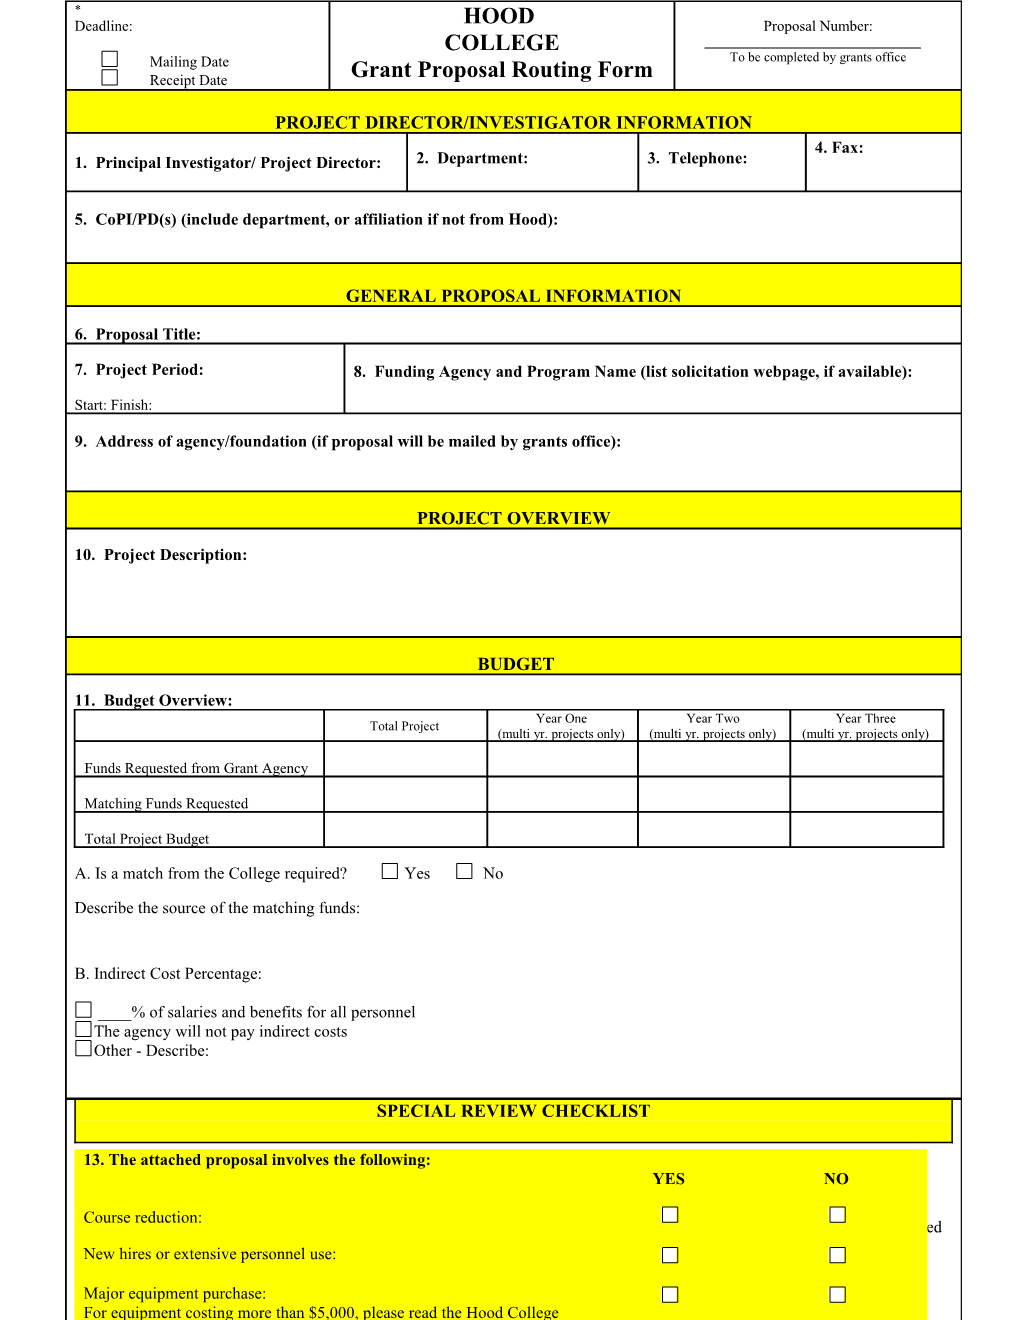 Grant Proposal Routing Form